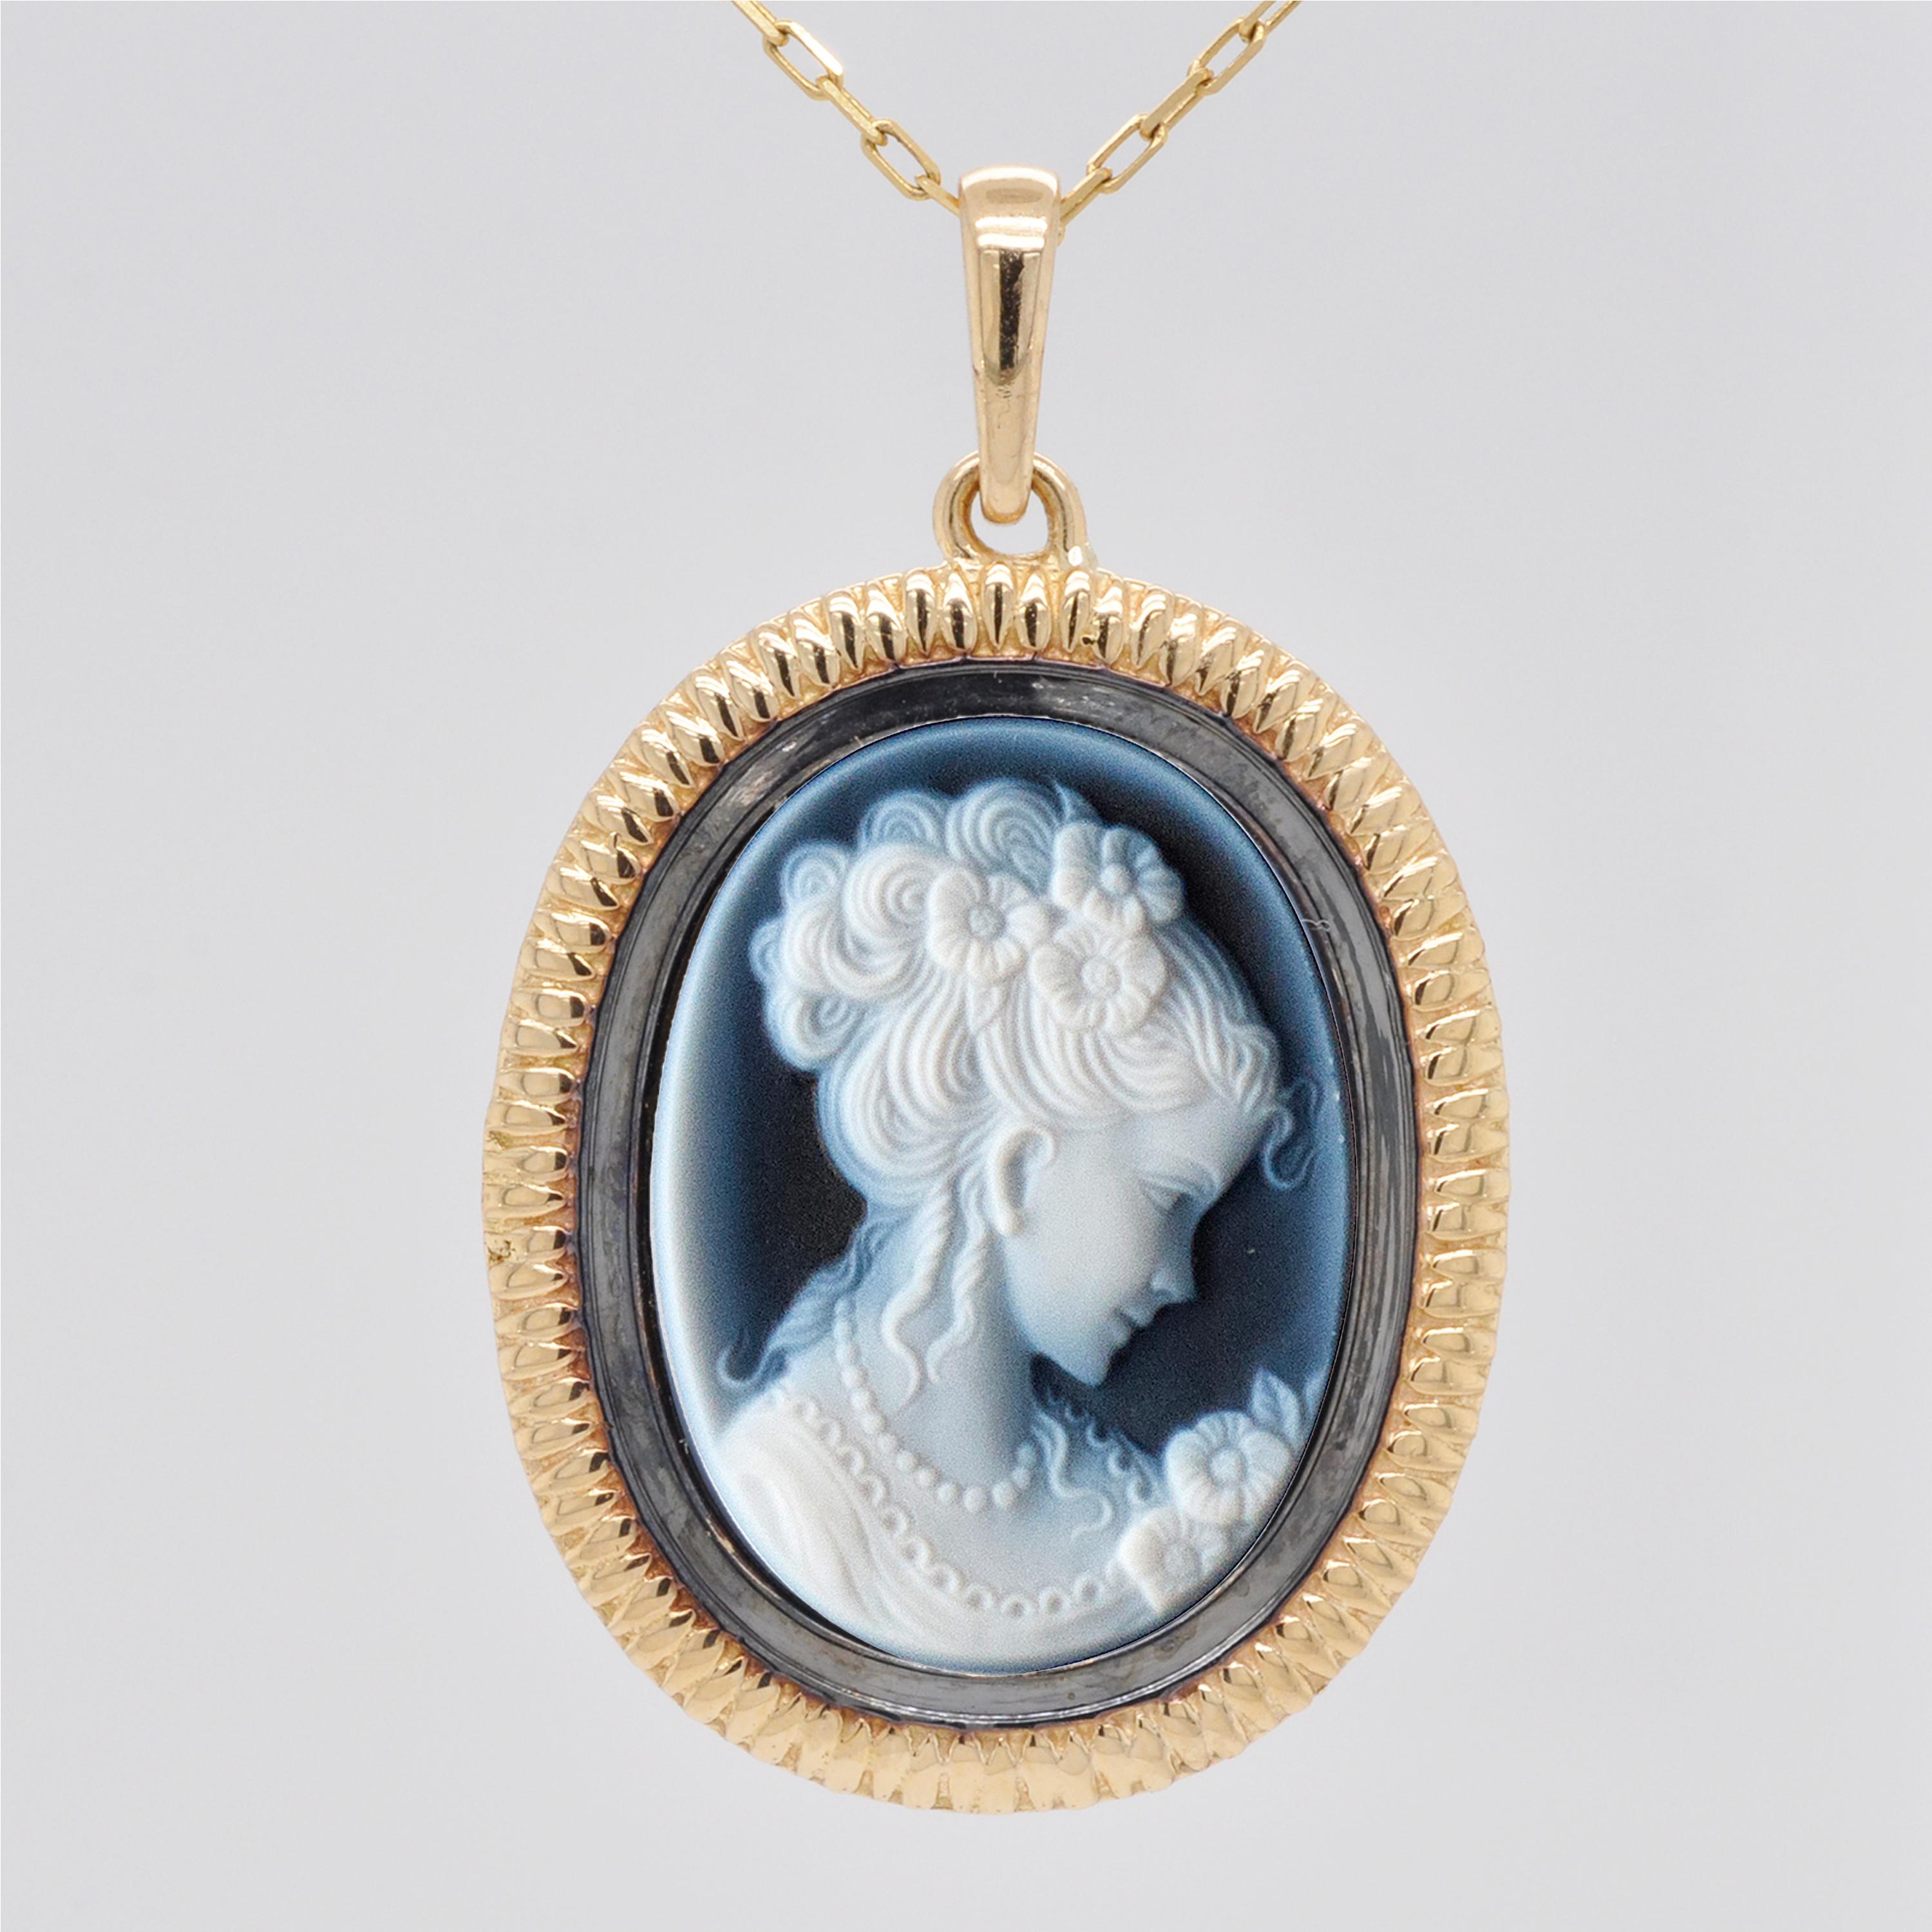 18 karat yellow gold princess lady victorian agate cameo carving pendant necklace

This stunning Victorian Agate Cameo carving pendant necklace is a piece to marvel. The gold frame with gold droplets is patterned in and out to give a solid look to